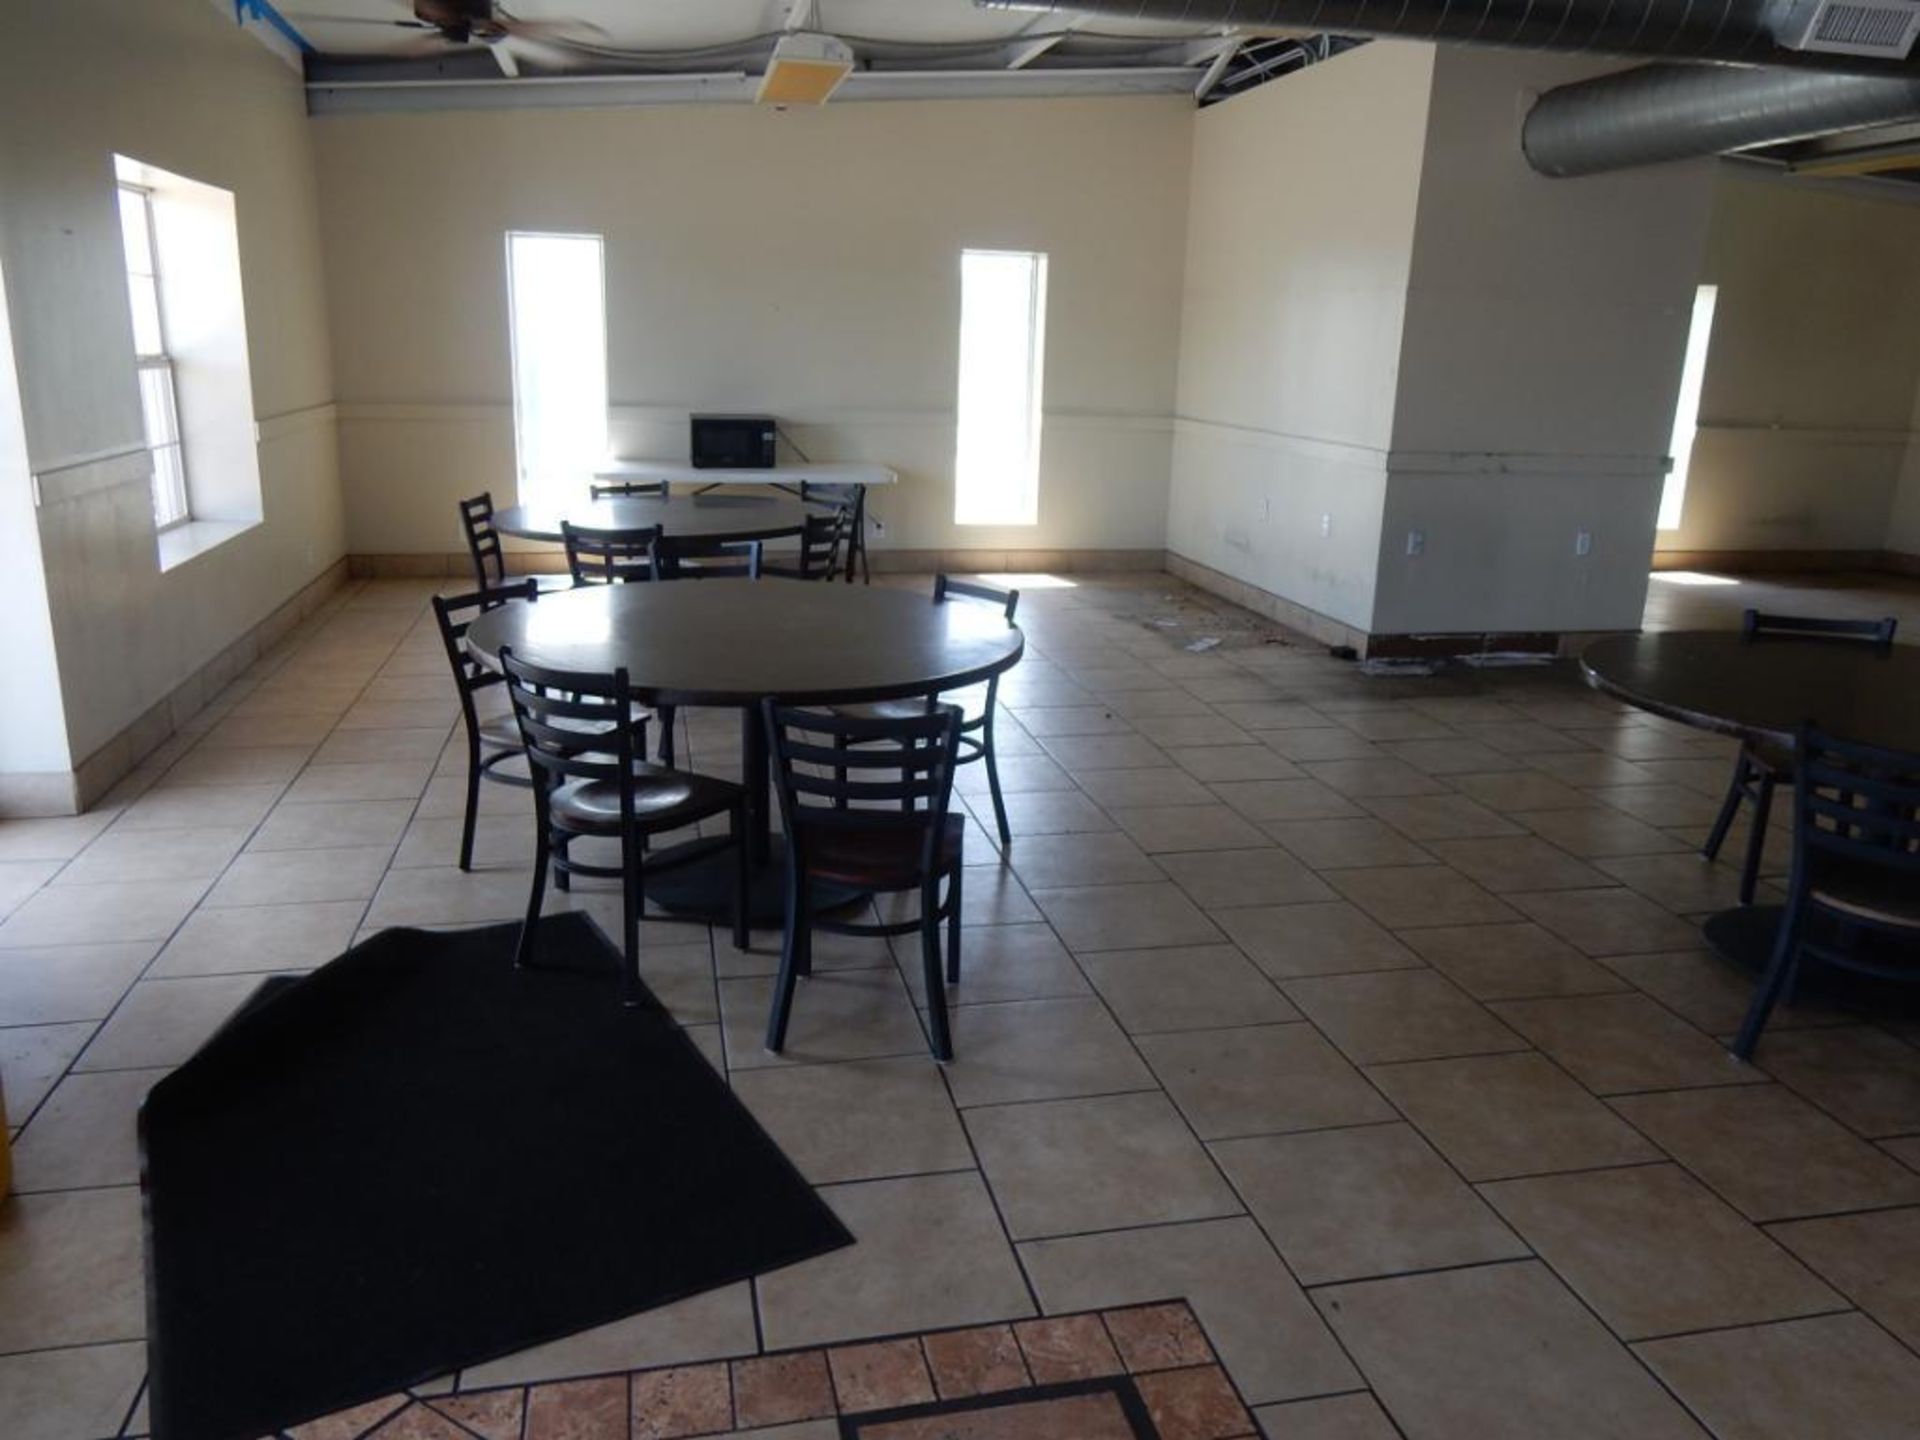 PROCEED OUTDOORS TO MAIN BREAKROOM BUILDING - Image 3 of 5